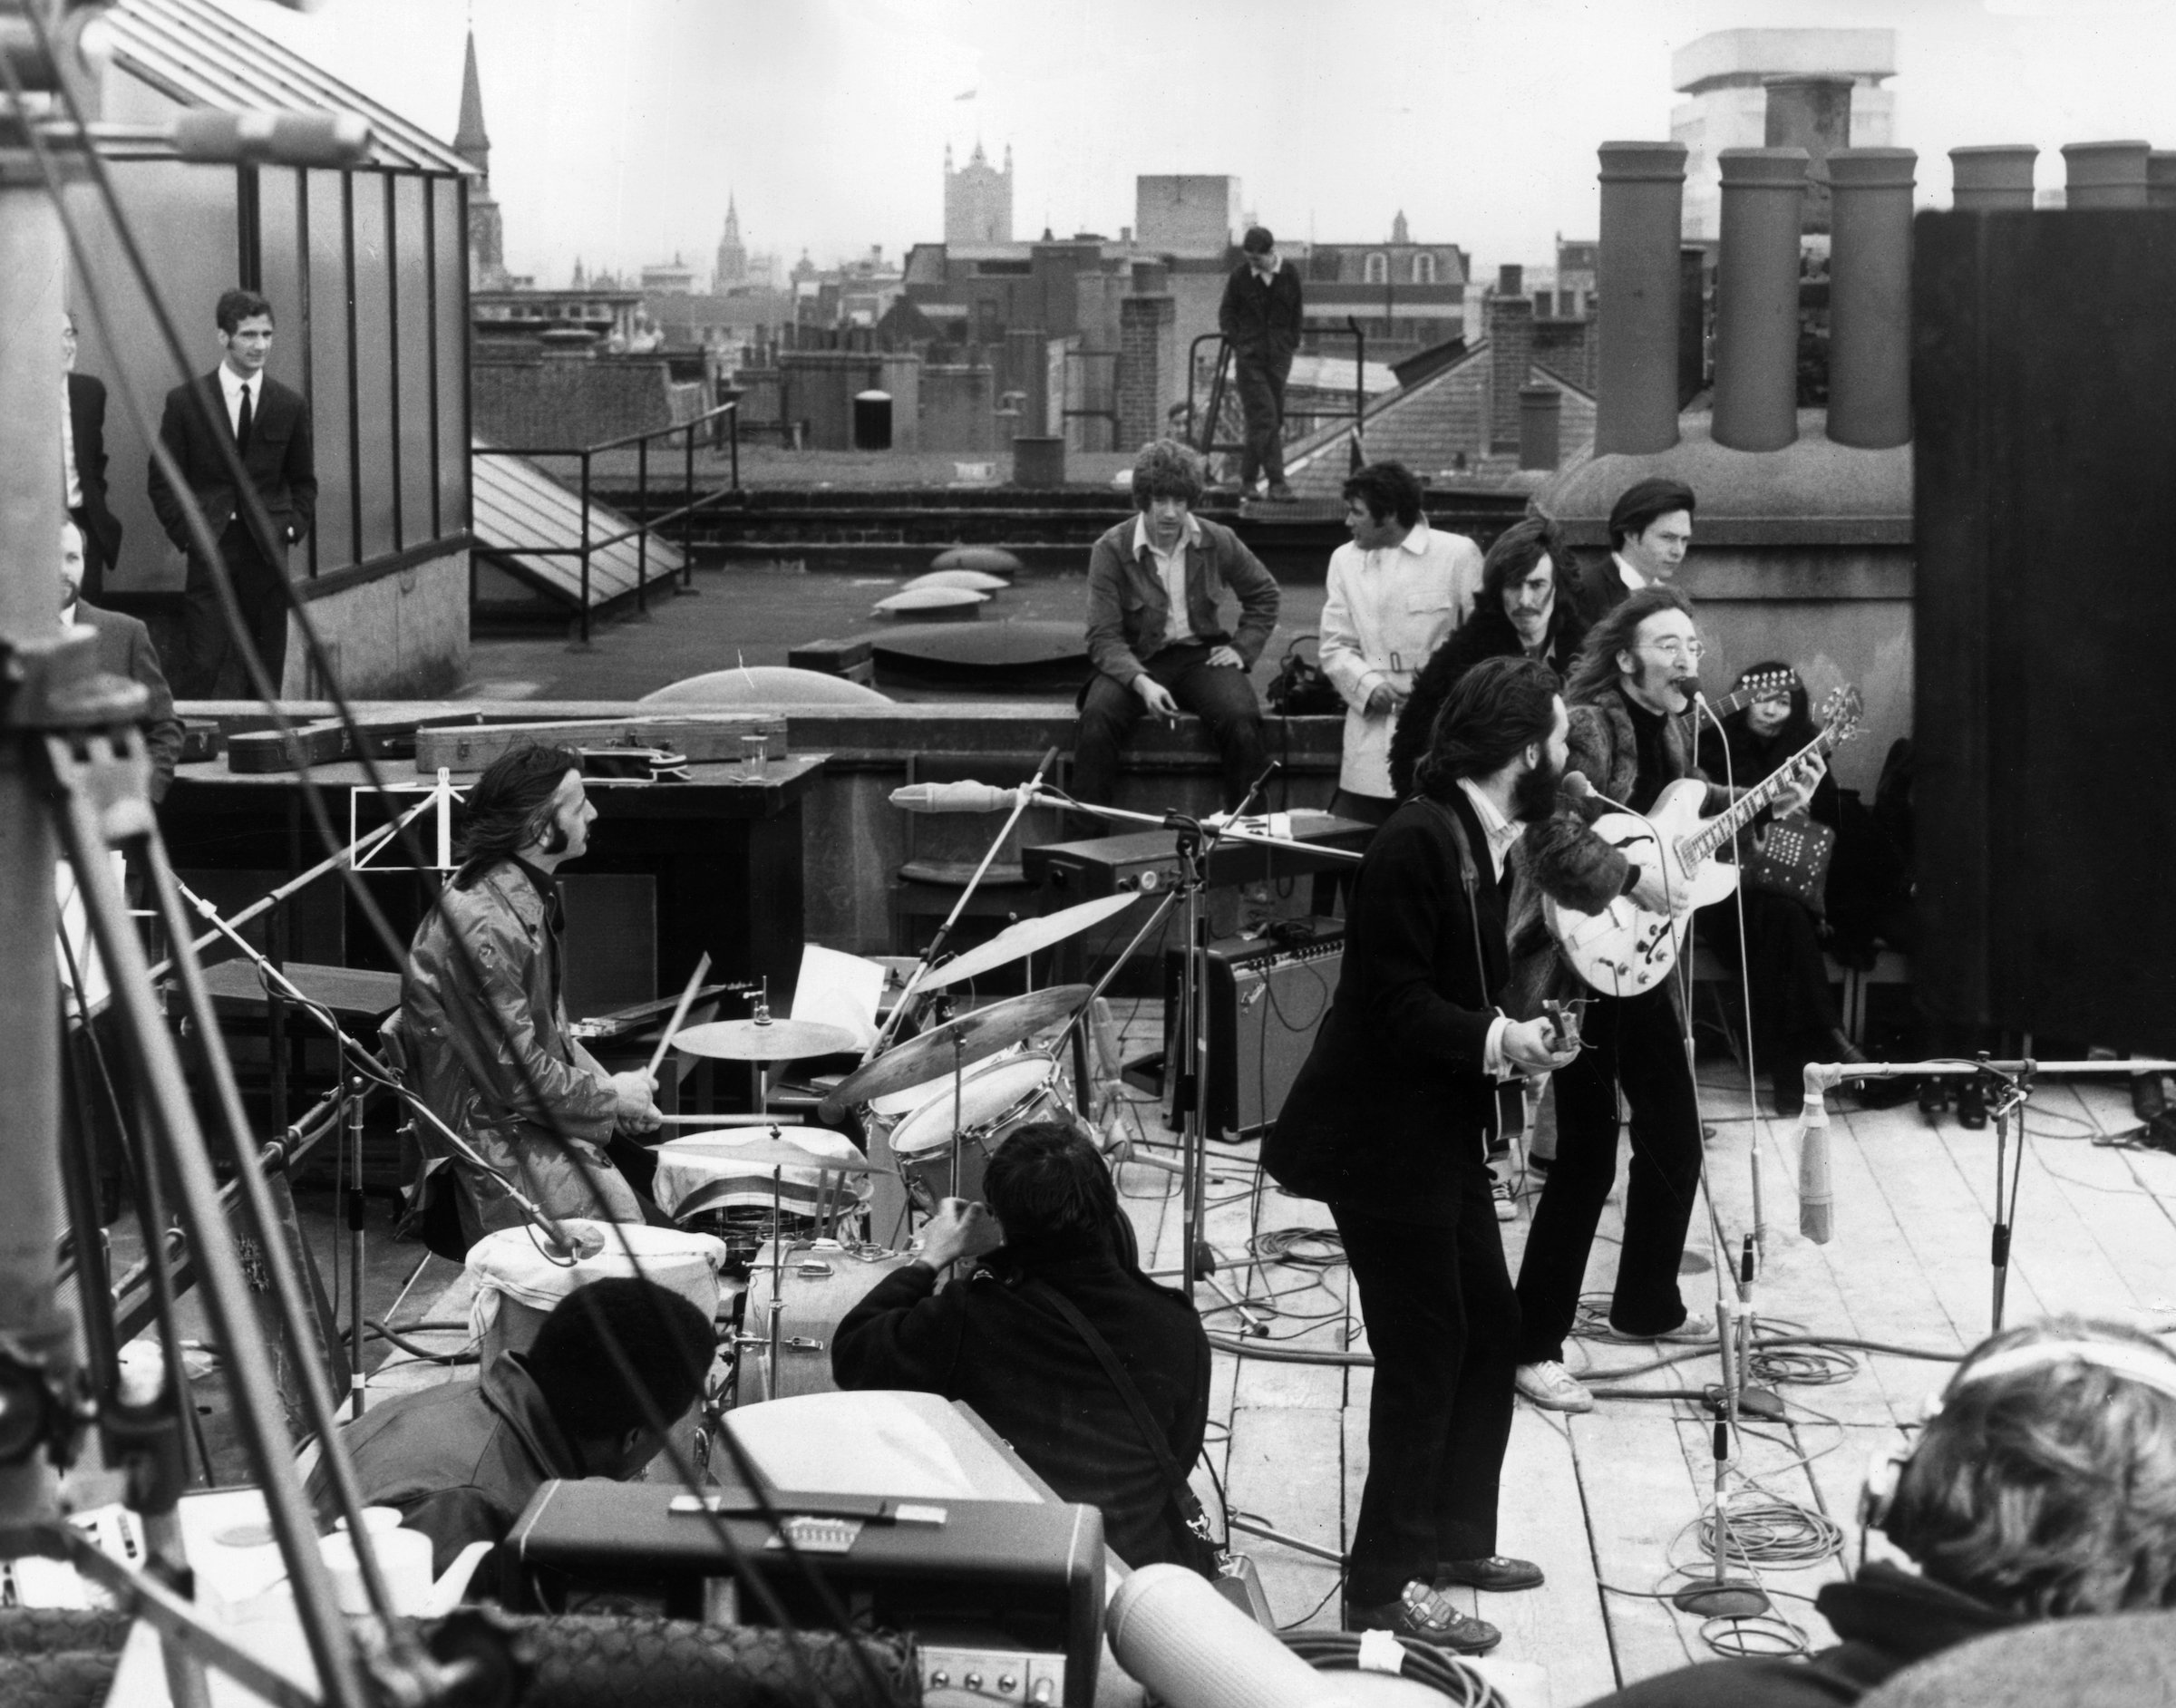 British rock group The Beatles performing their last live public concert on the rooftop of the Apple Organization building